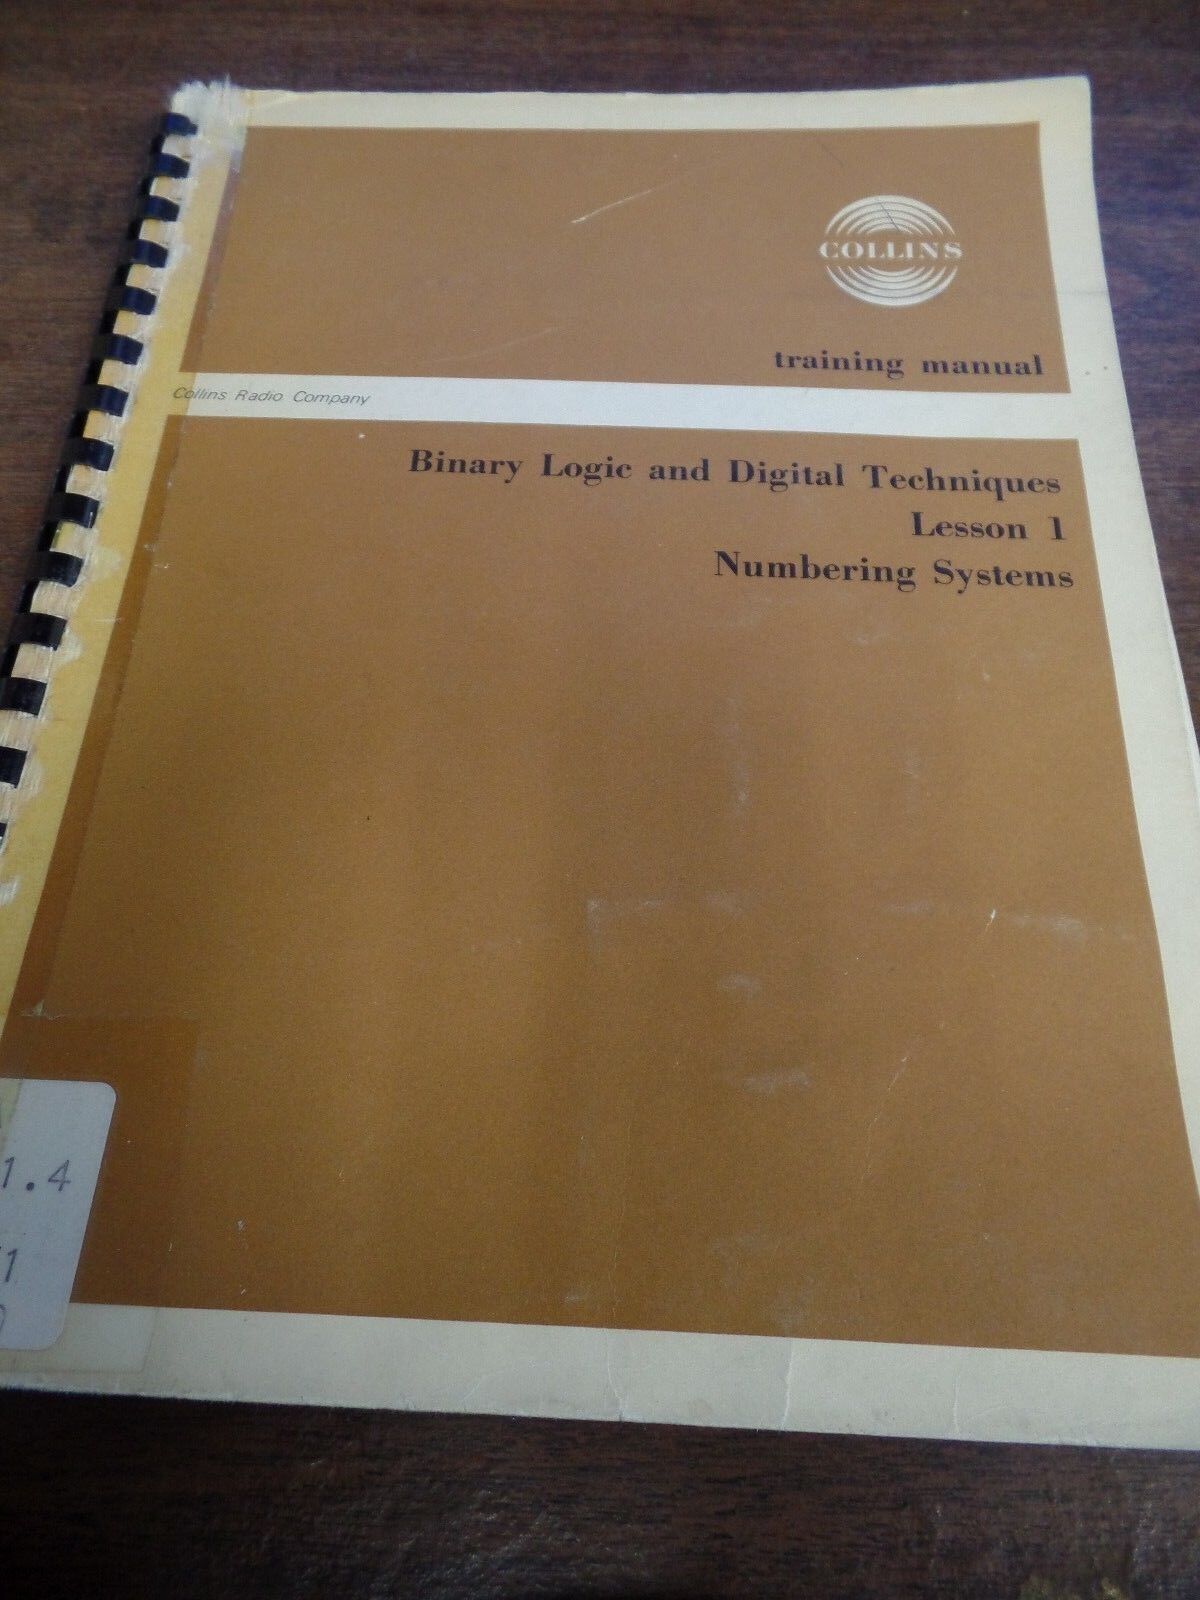 Binary Logic and Digital Techniques Numbering Systems Ex-FAA Library 030316ame